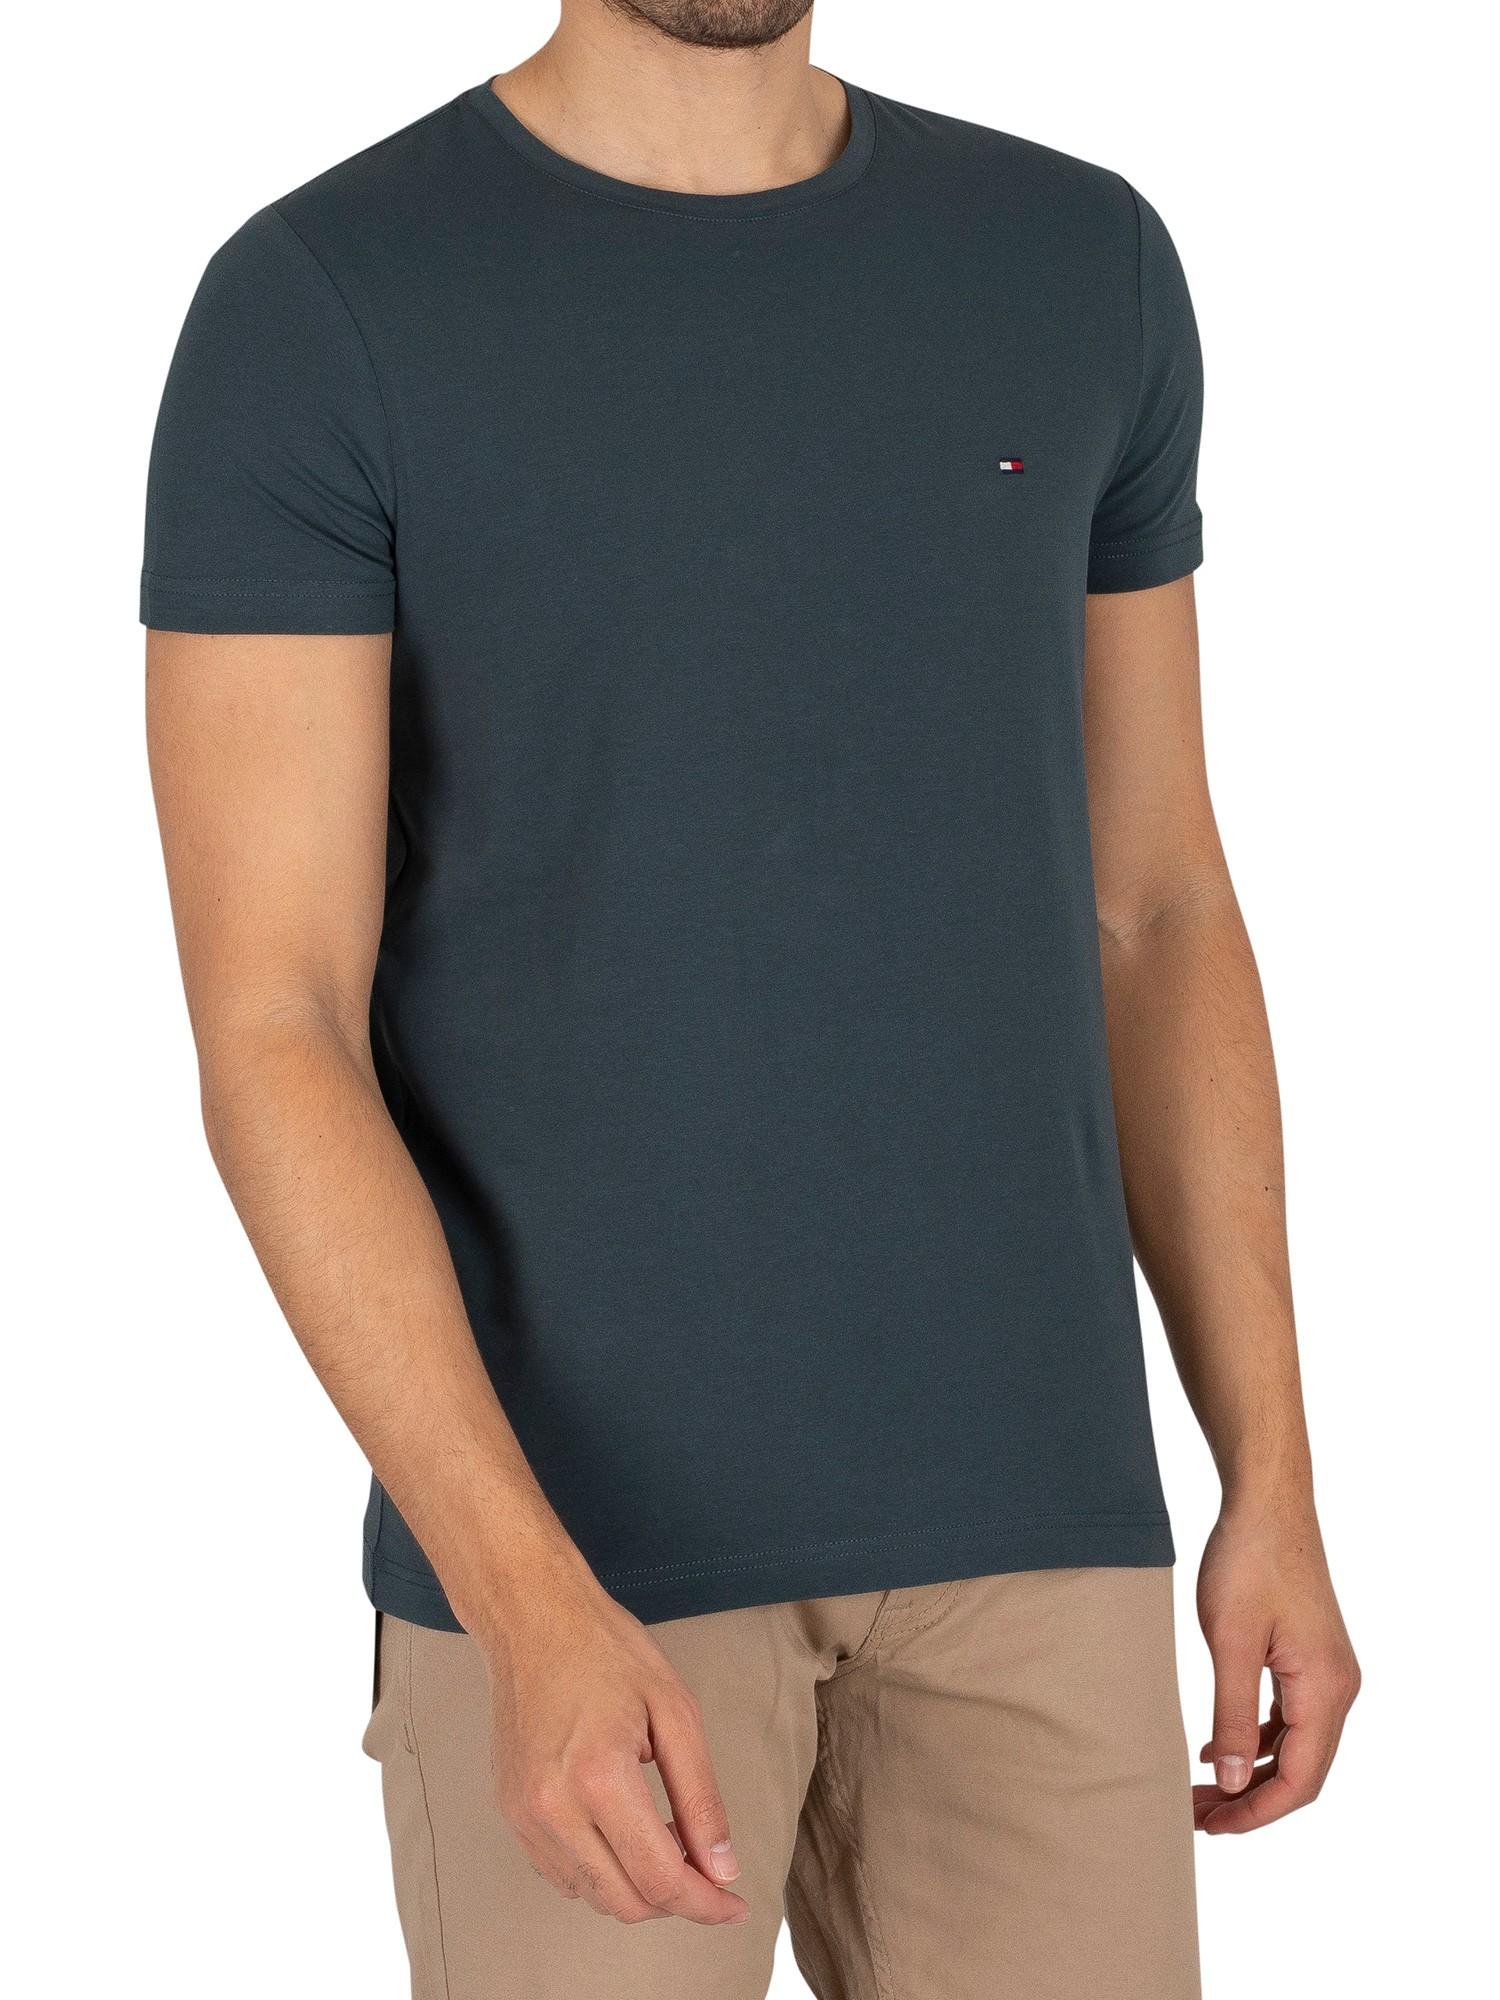 Tommy Hilfiger Cotton Stretch Slim Fit T-shirt in Blue for Men - Lyst